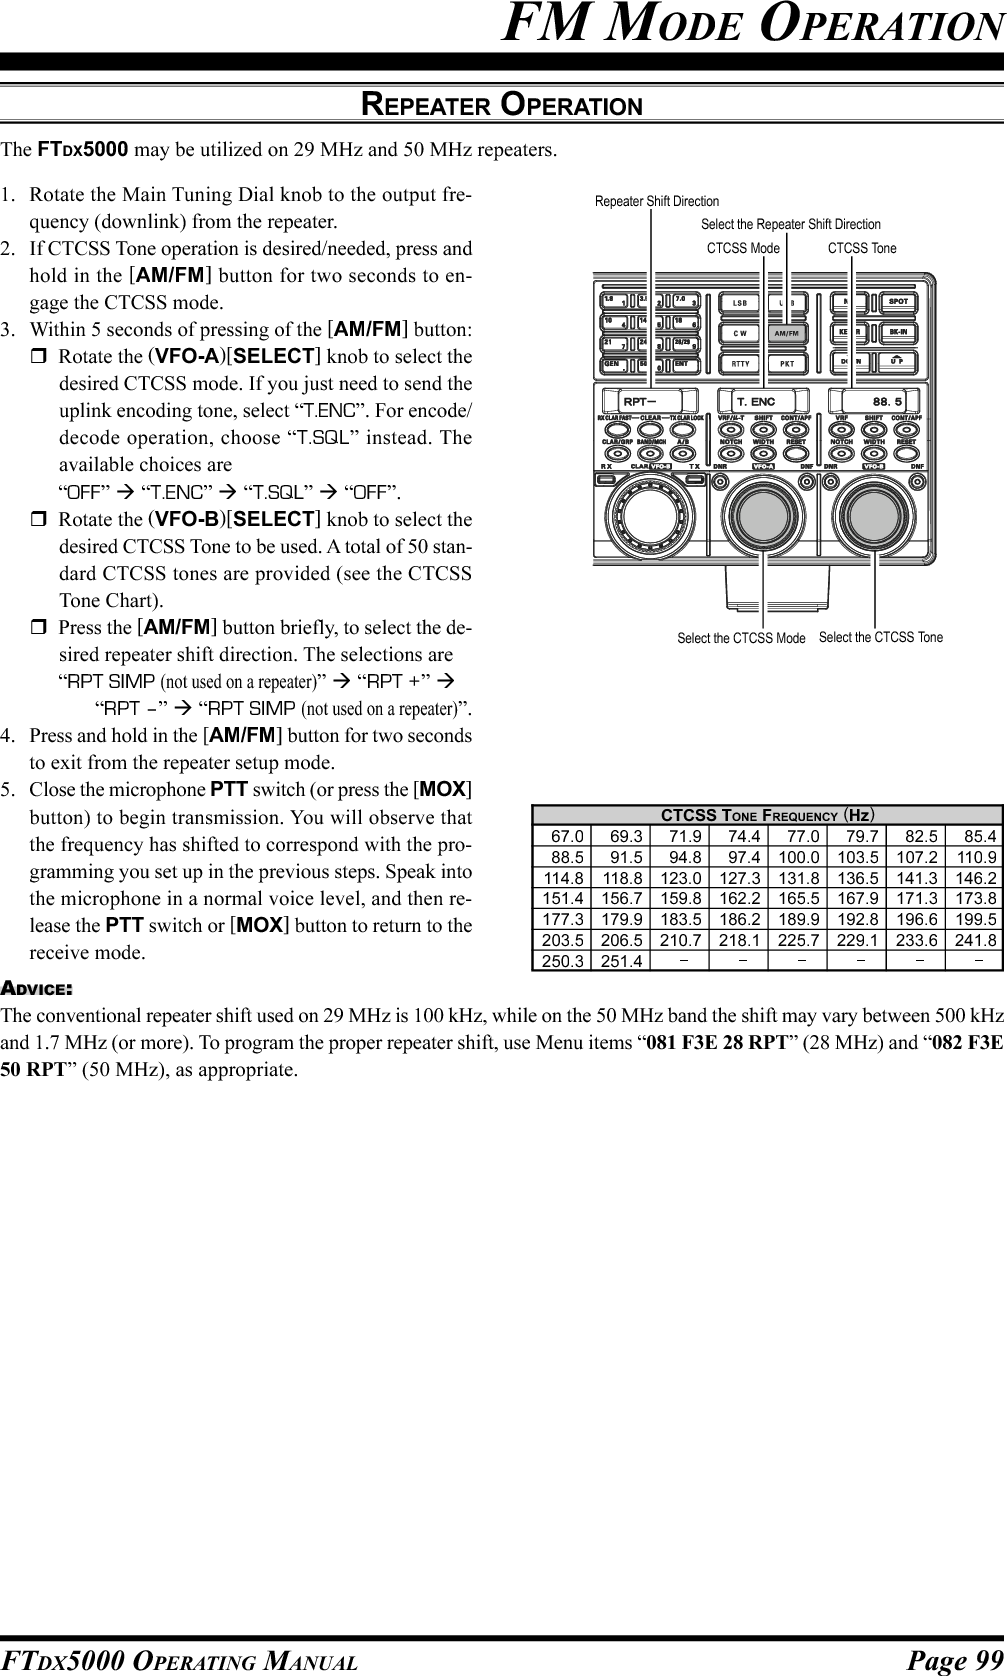 Page 100 FTDX5000 OPERATING MANUALCONVENIENT MEMORY FUNCTIONSThe FTDX5000 contains ninety-nine regular memories, labeled “01” through “99”; nine specialy programmed limit memorypairs, labeled “P1L/P1U” through “P9L/P9U”; and five QMB (Quick Memory Bank) memories, labeled “C-1” through“C-5”. Each memory location not only stores the VFO-A frequency and mode, but also stores the various settings shownbelow. By default the 99 regular memories are contained in one group. However, they can be arranged in up to six separategroups, if desired.QUICK POINT:The FTDX5000’s memory channels store the following data (in addition to the operating frequency):FrequencyModeClarifier status and its Offset FrequencyANT statusATT statusIPO statusVRF statusRoofing filter status and its BandwidthNoise Blanker statusCONTOUR status and its Peak FrequencyDSP Noise Reduction (DNR) status and its Reduction algorithm selection.DSP Notch filter (NOTCH) statusNAR bandwidth statusDSP Auto Notch filter (DNF) statusRepeater Shift Direction and CTCSS Tone FrequencyMEMORY OPERATIONIMPOTANT NOTEOn rare occasions the stored data may become cor-rupted by miss operation, or static electricity. Whenrepairs are made, the memory data may be lost.Please write down or record the memory informa-tion so you will be able to restore it if needed.